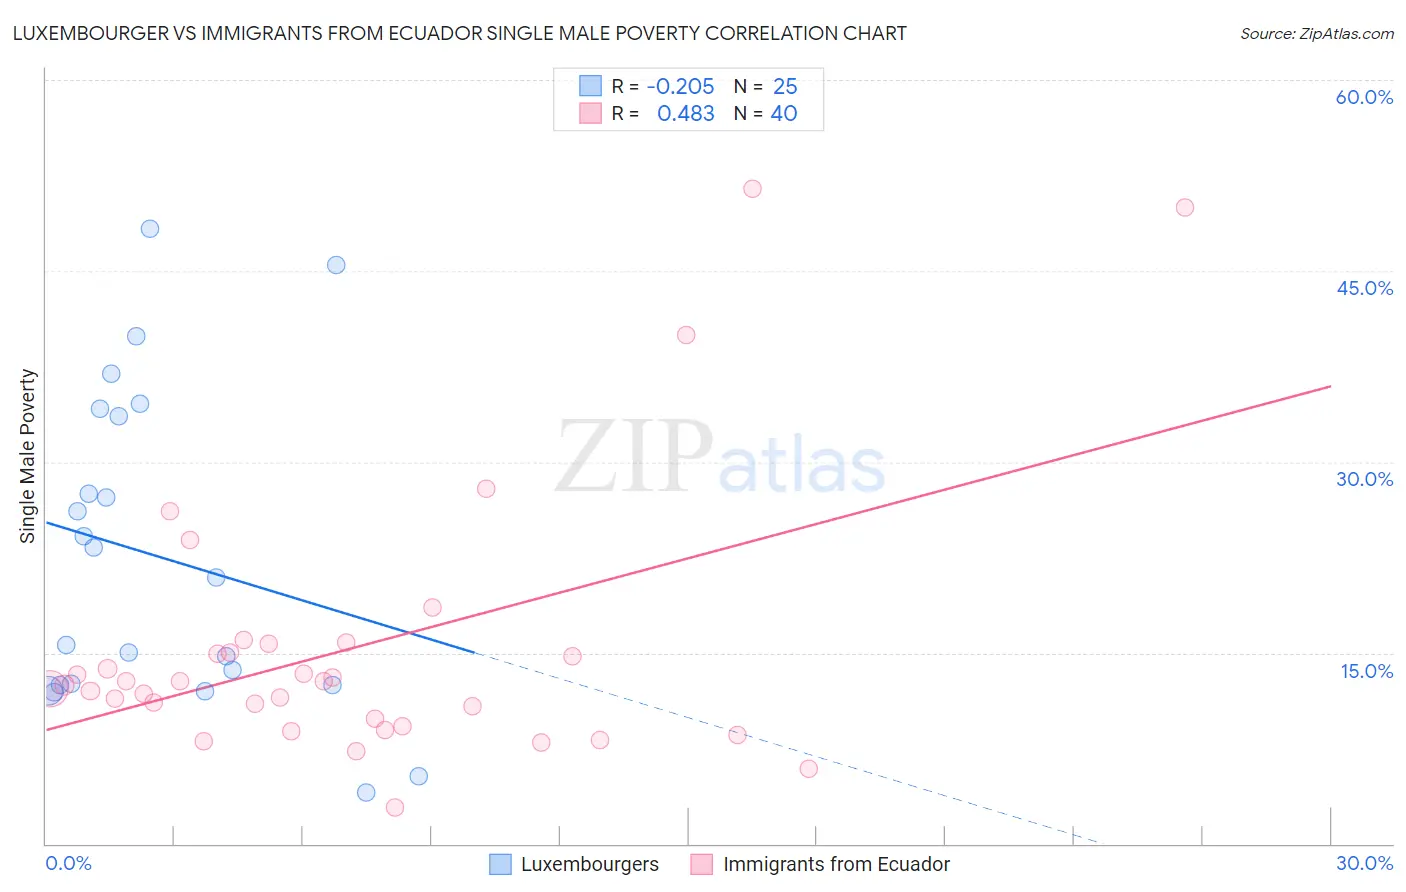 Luxembourger vs Immigrants from Ecuador Single Male Poverty